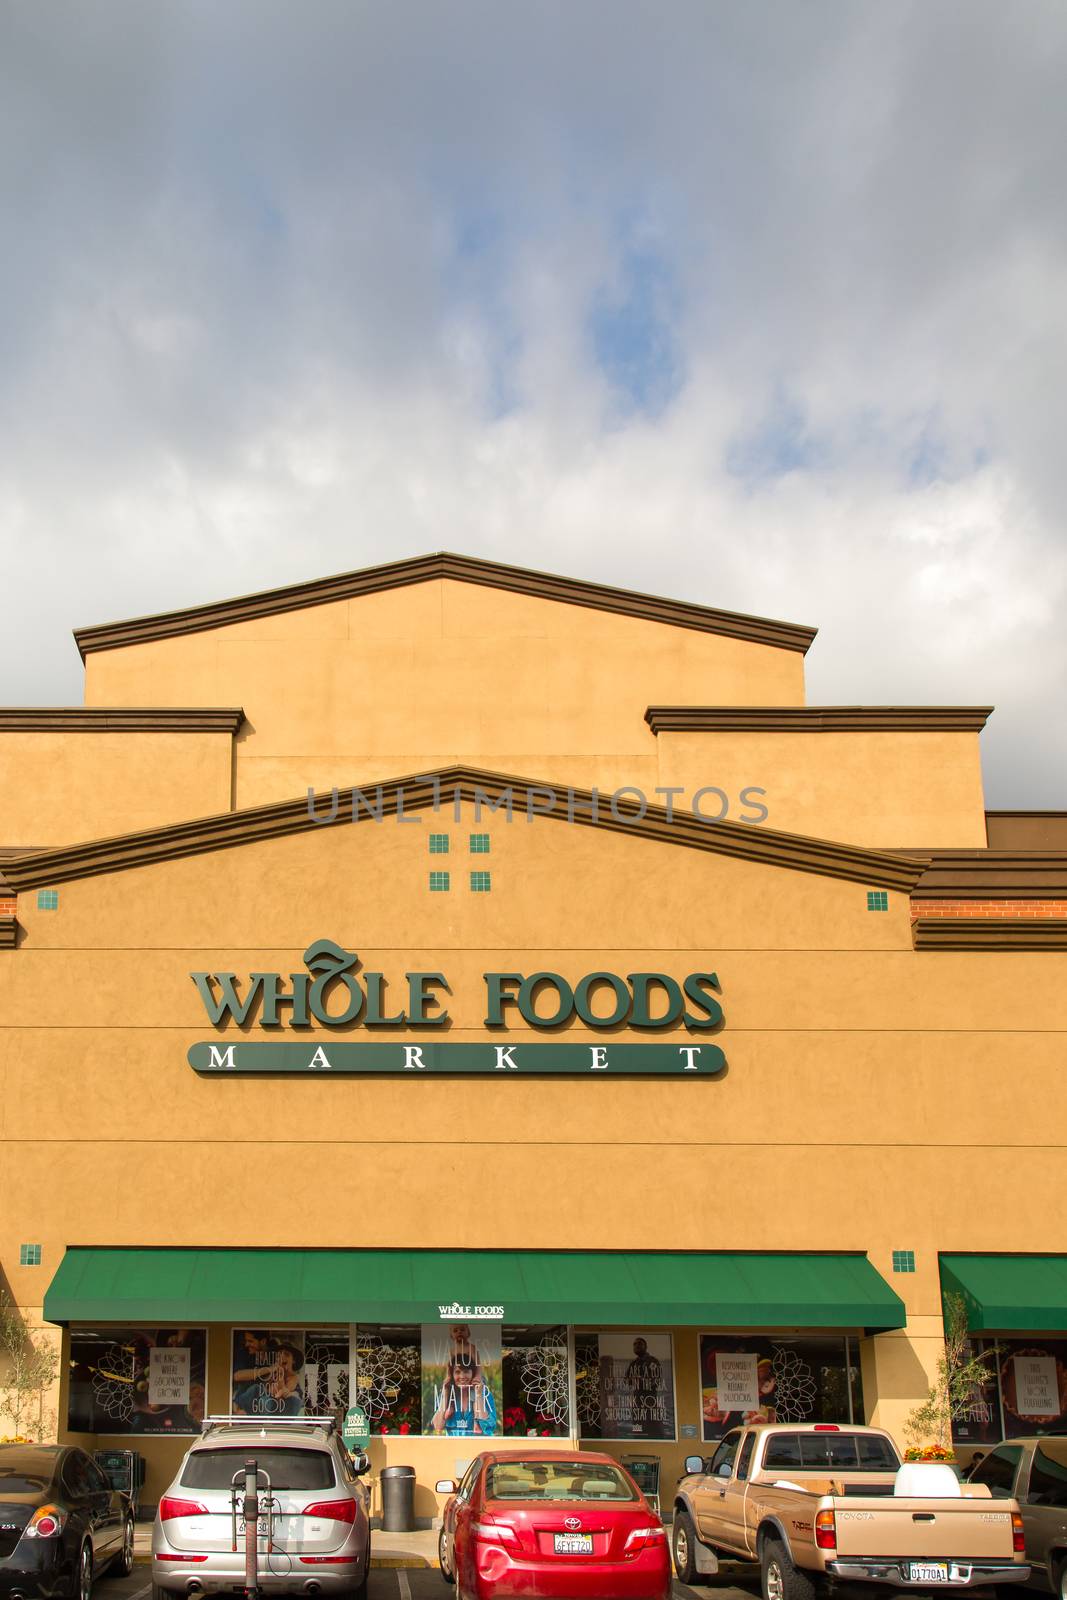 PASADENA, CA/USA - NOVEMBER 15, 2014:  Whole Food Market exterior.  Whole Foods is an American foods supermarket chain specializing in natural and organic foods.